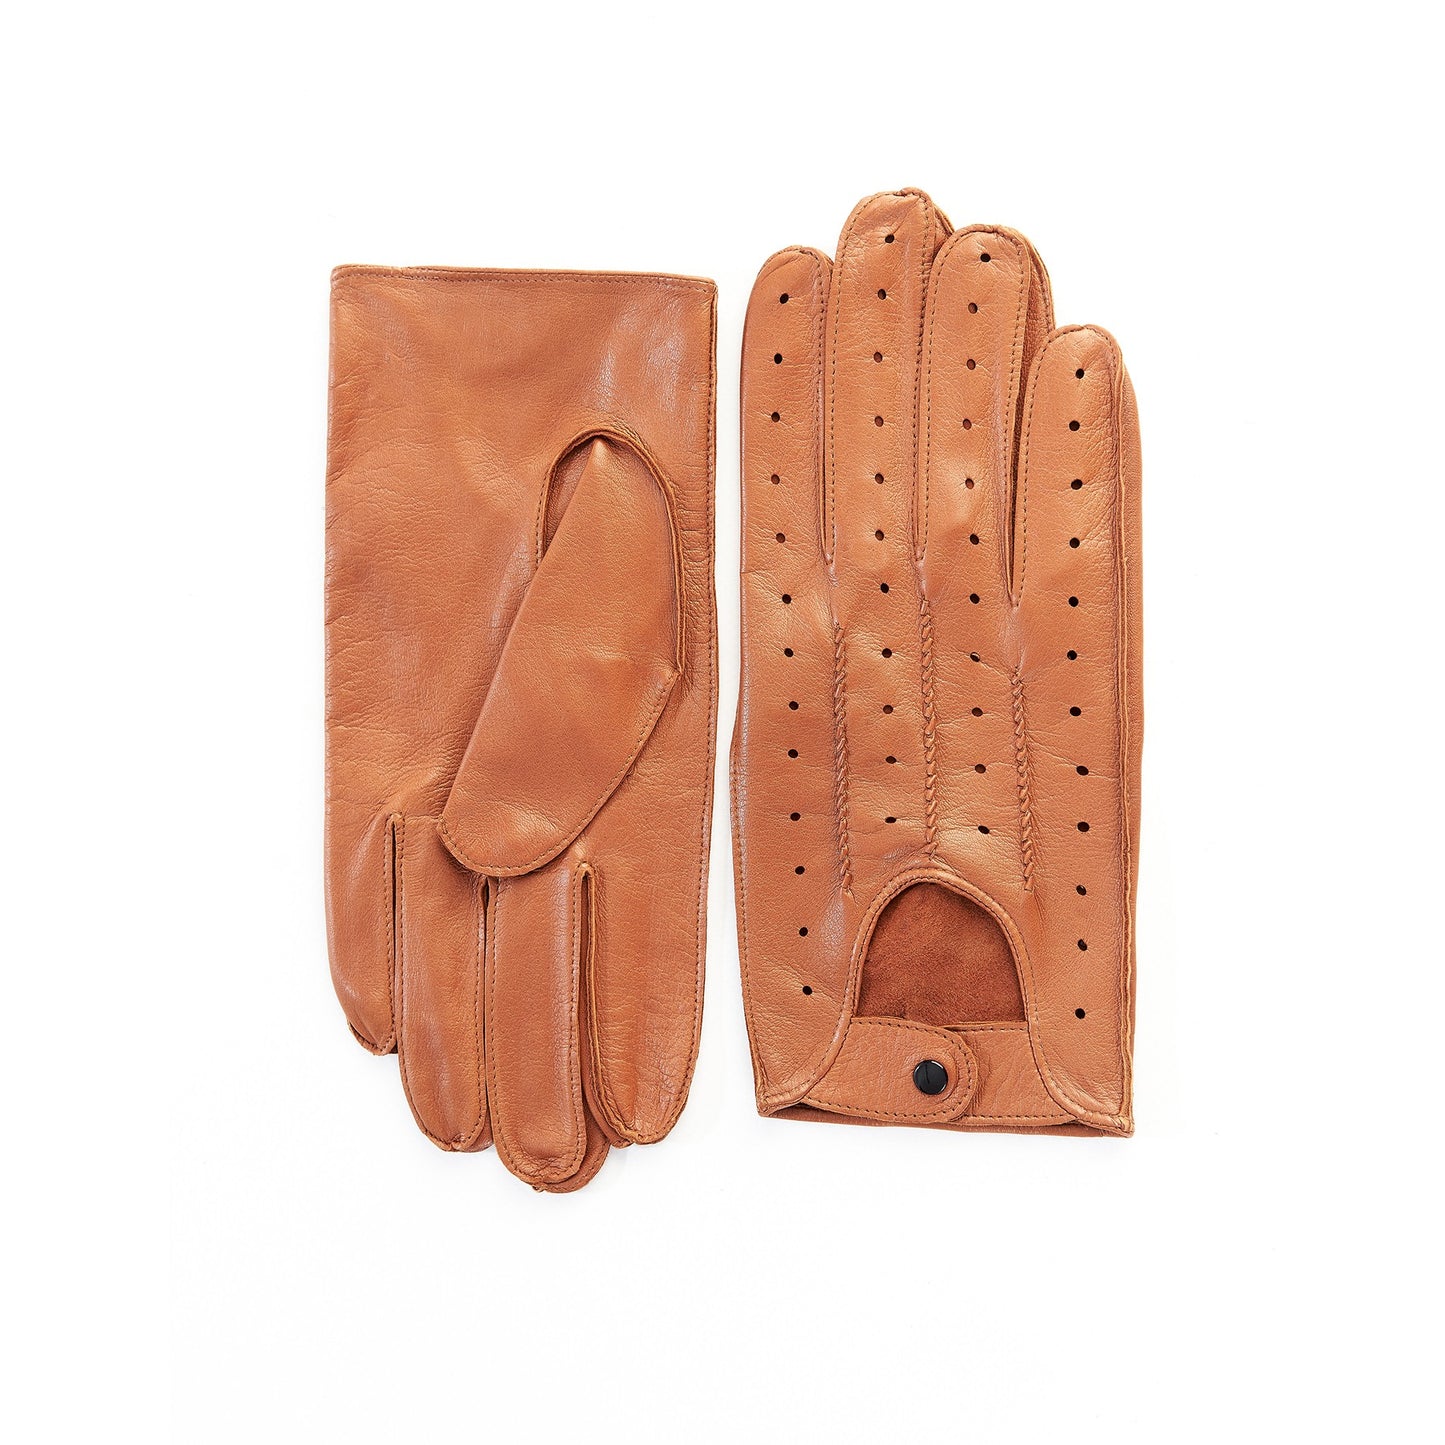 Men's unlined camel leather driving gloves with button closure